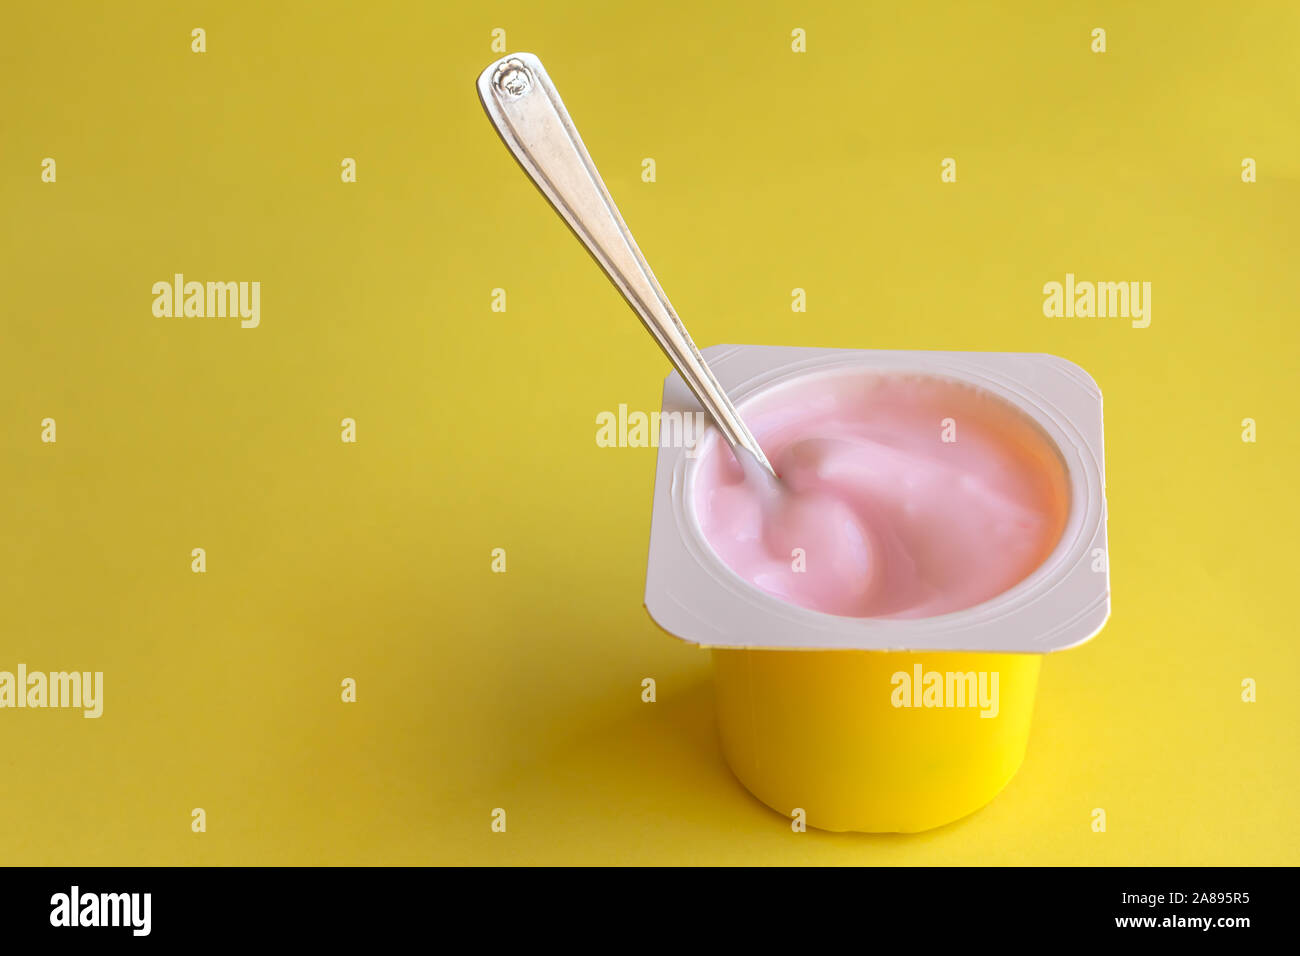 Download Strawberrry Pink Yogurt In Yellow Plastic Cup With Spoon Isolated On Bright Yellow Background With Space For Text Stock Photo Alamy Yellowimages Mockups